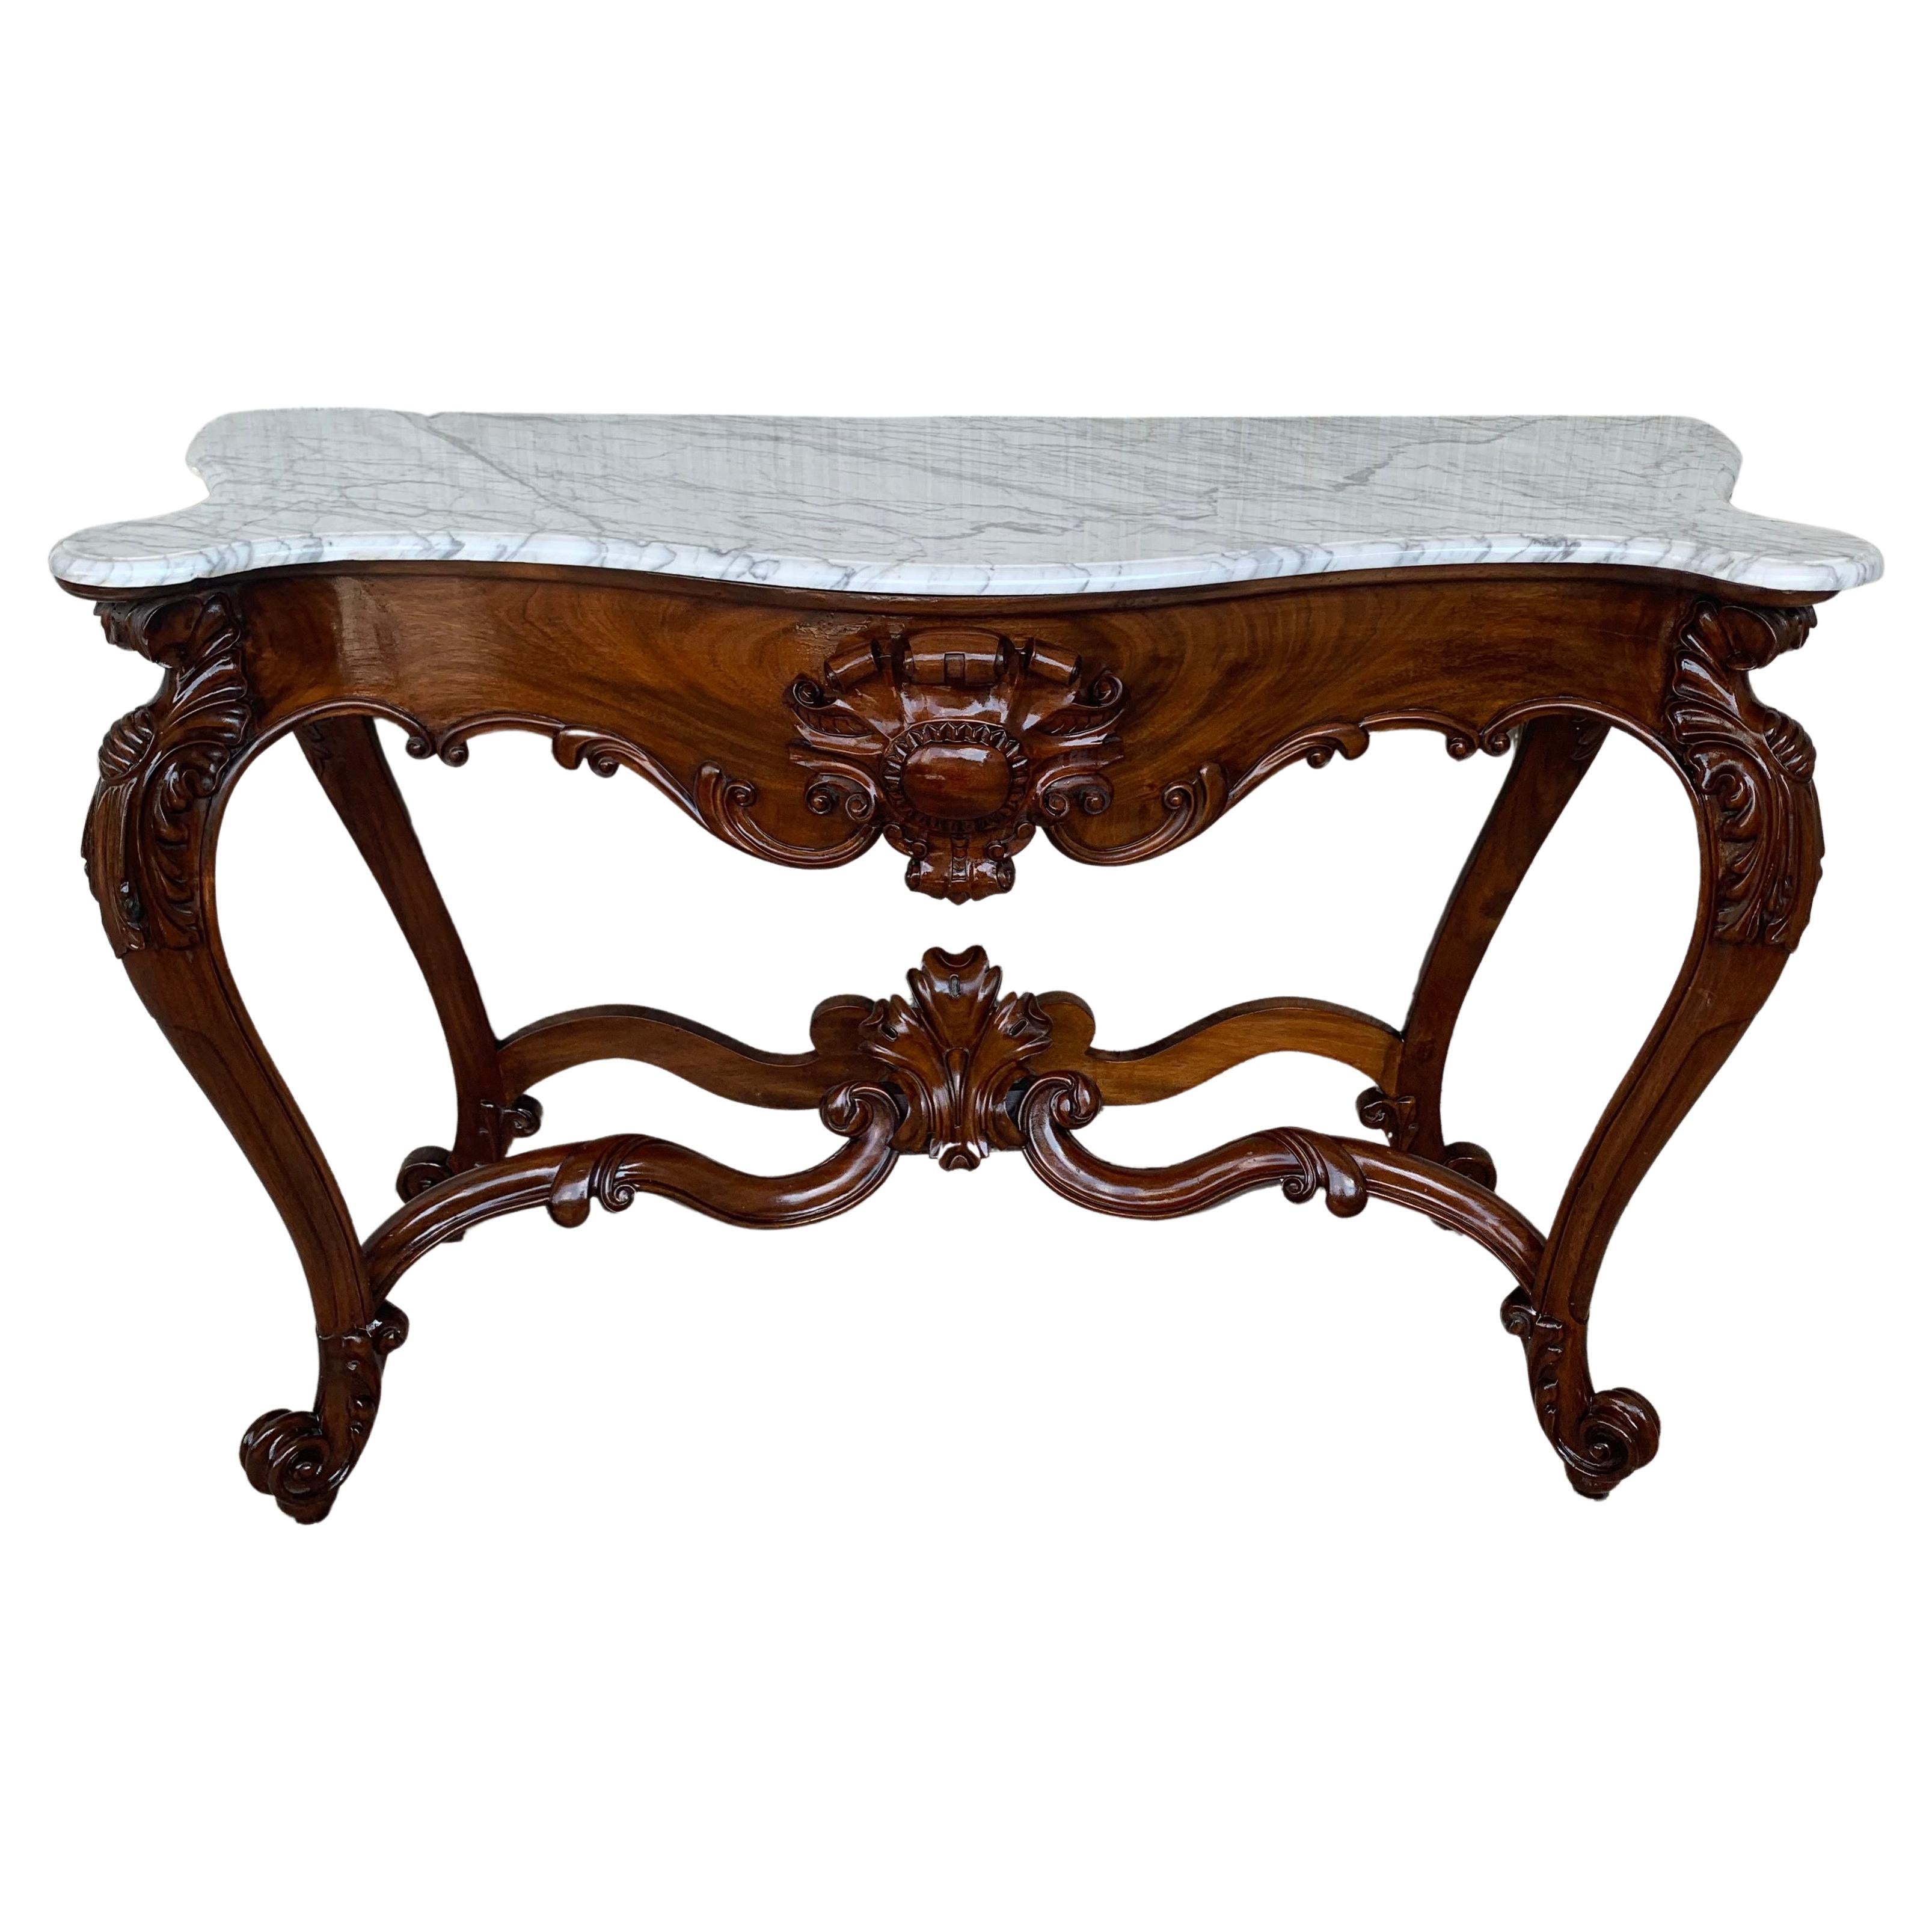  Large French Regency Carved Walnut Console Table with White Marble Top